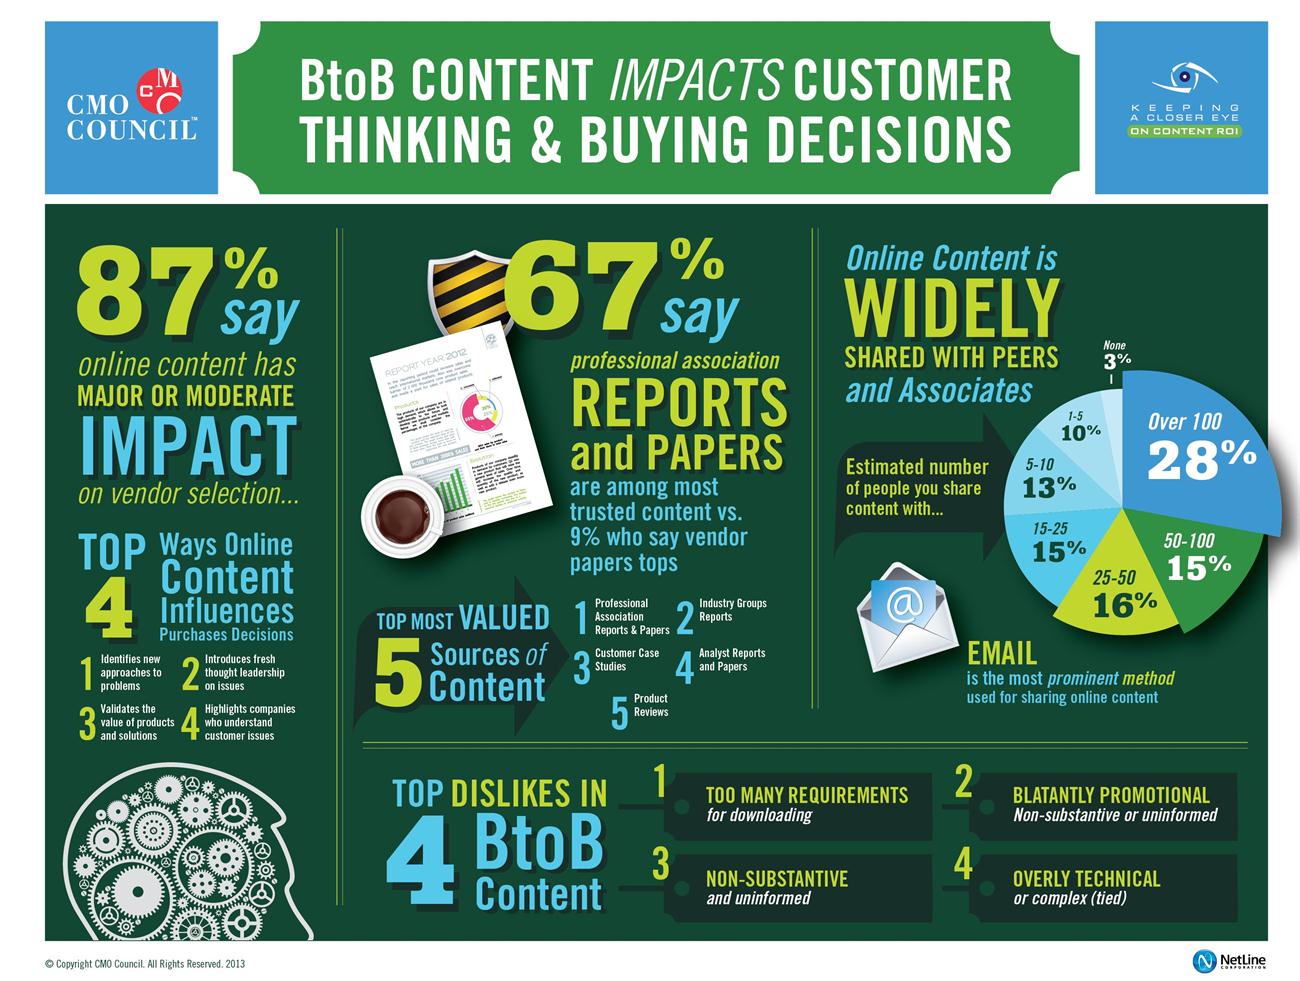 b2b-content-infographic-cmo-council-2013